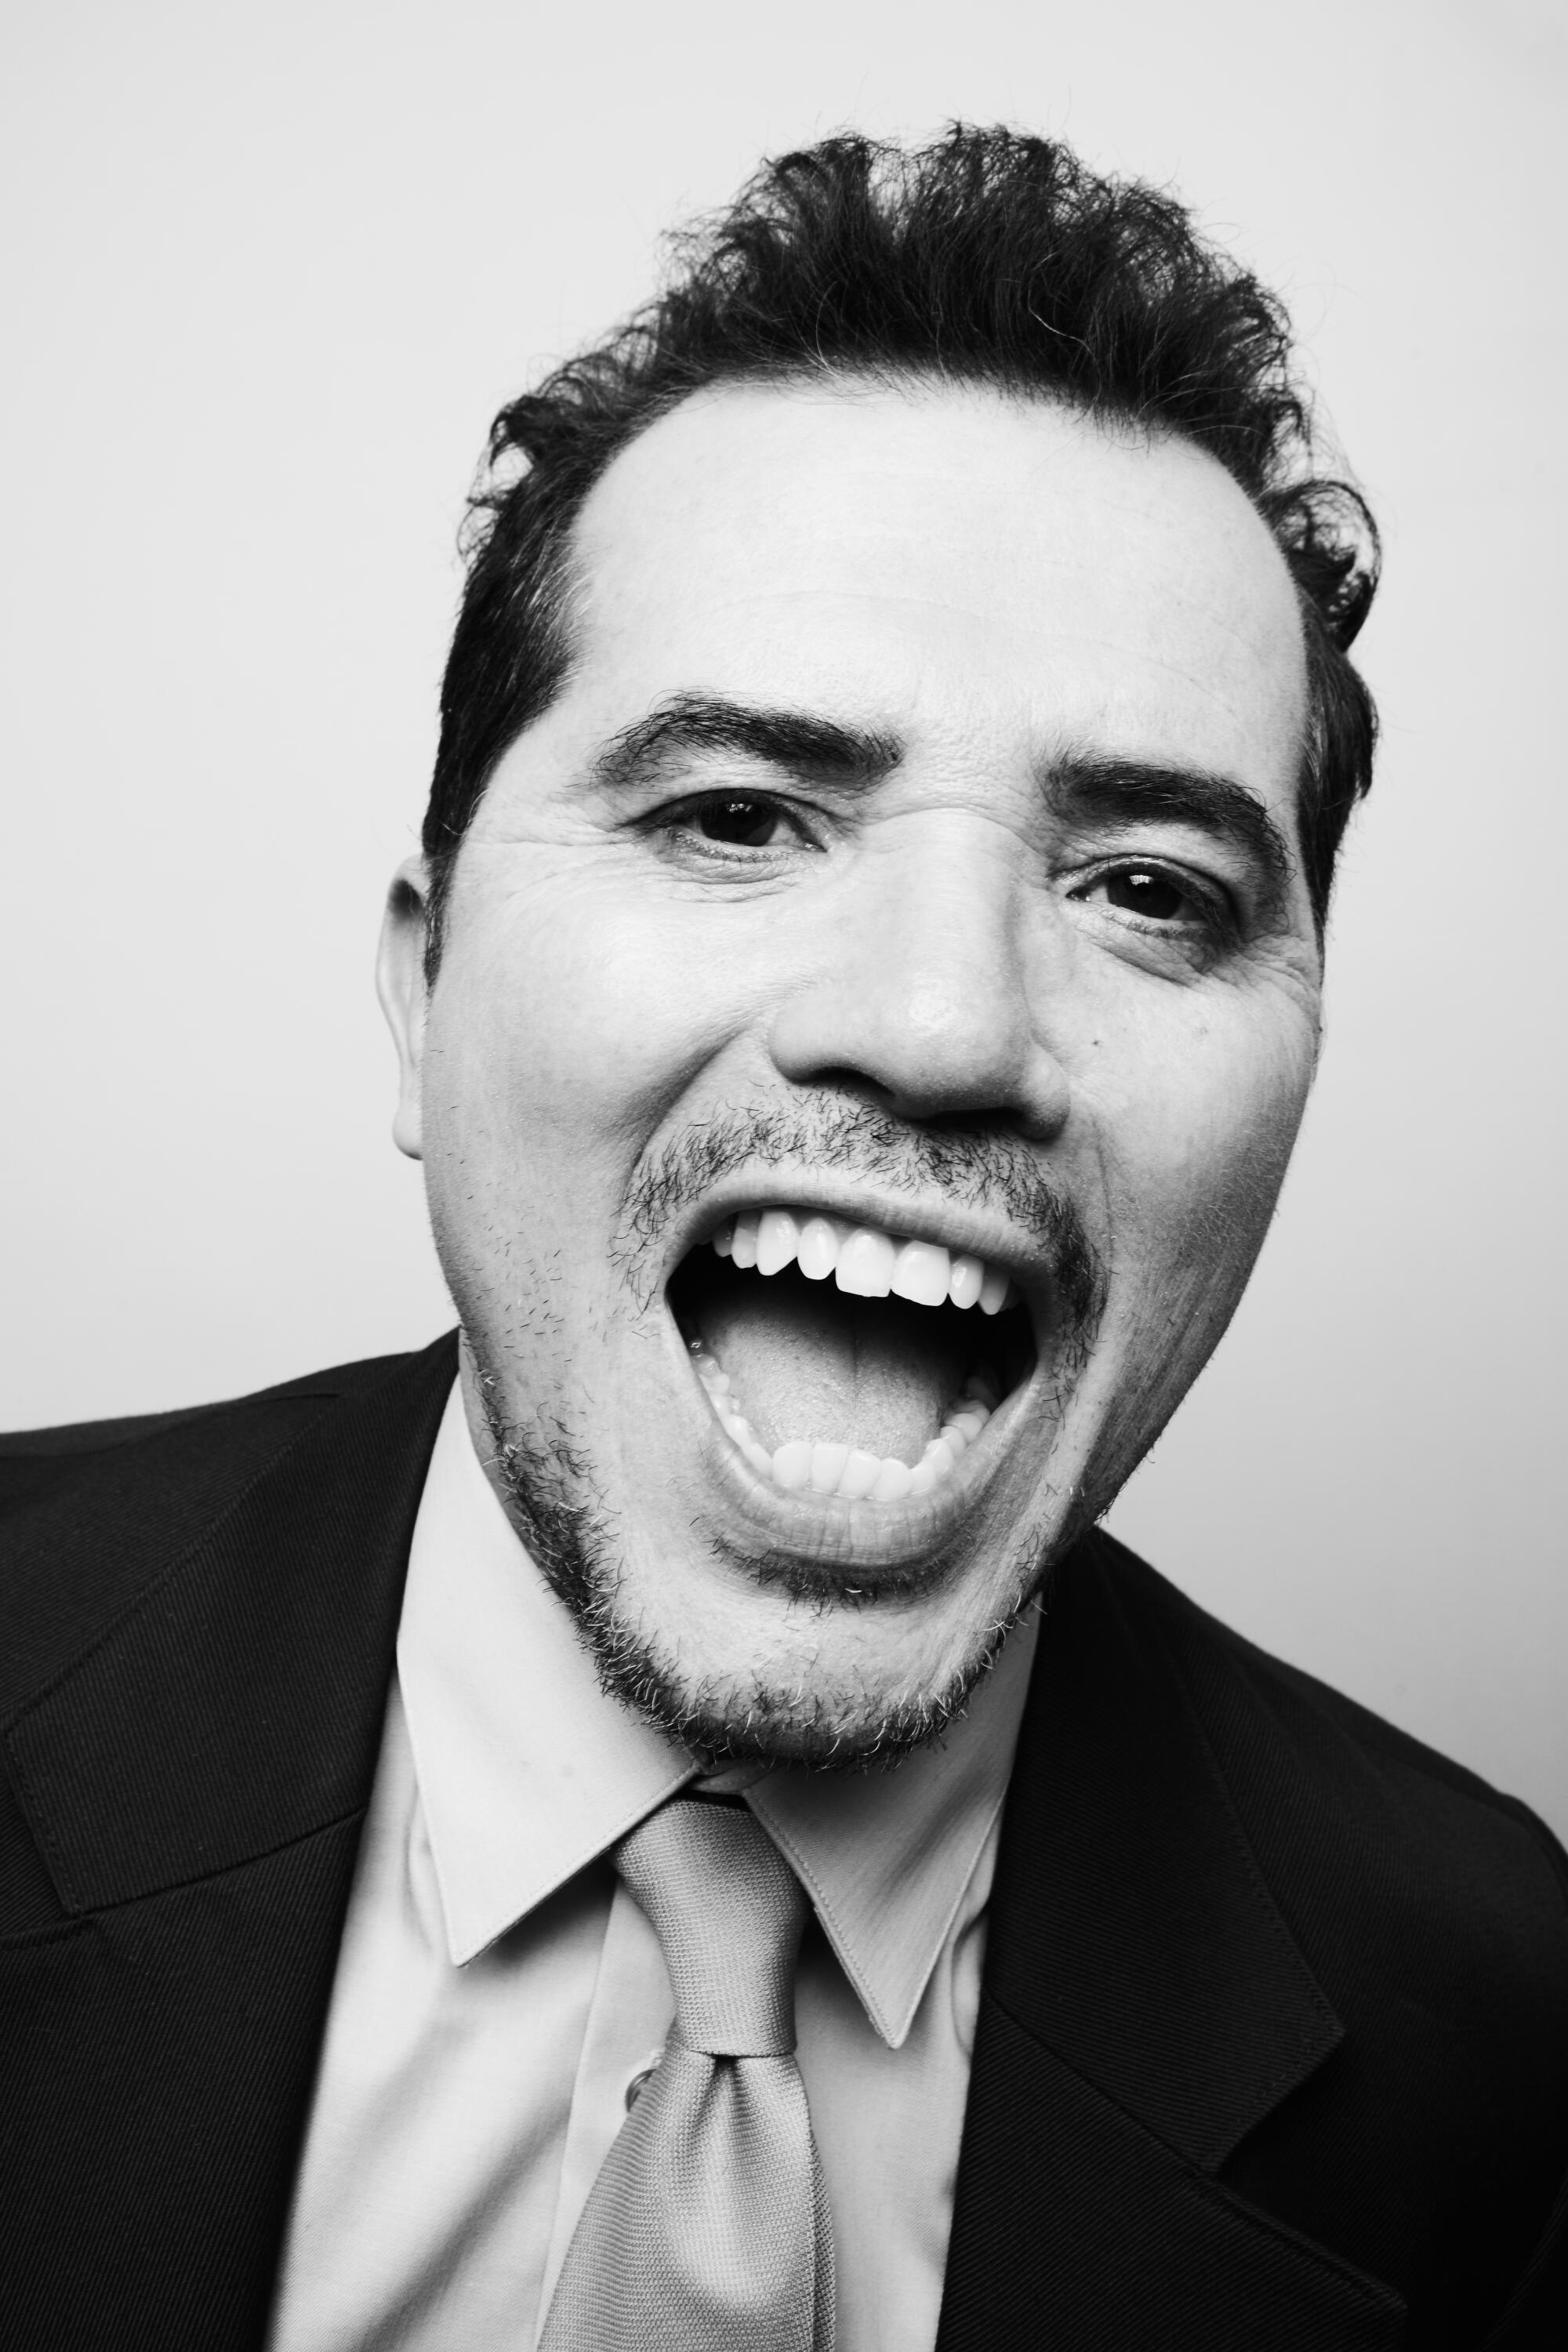 A black-and white portrait of John Leguizamo with his mouth wide open.